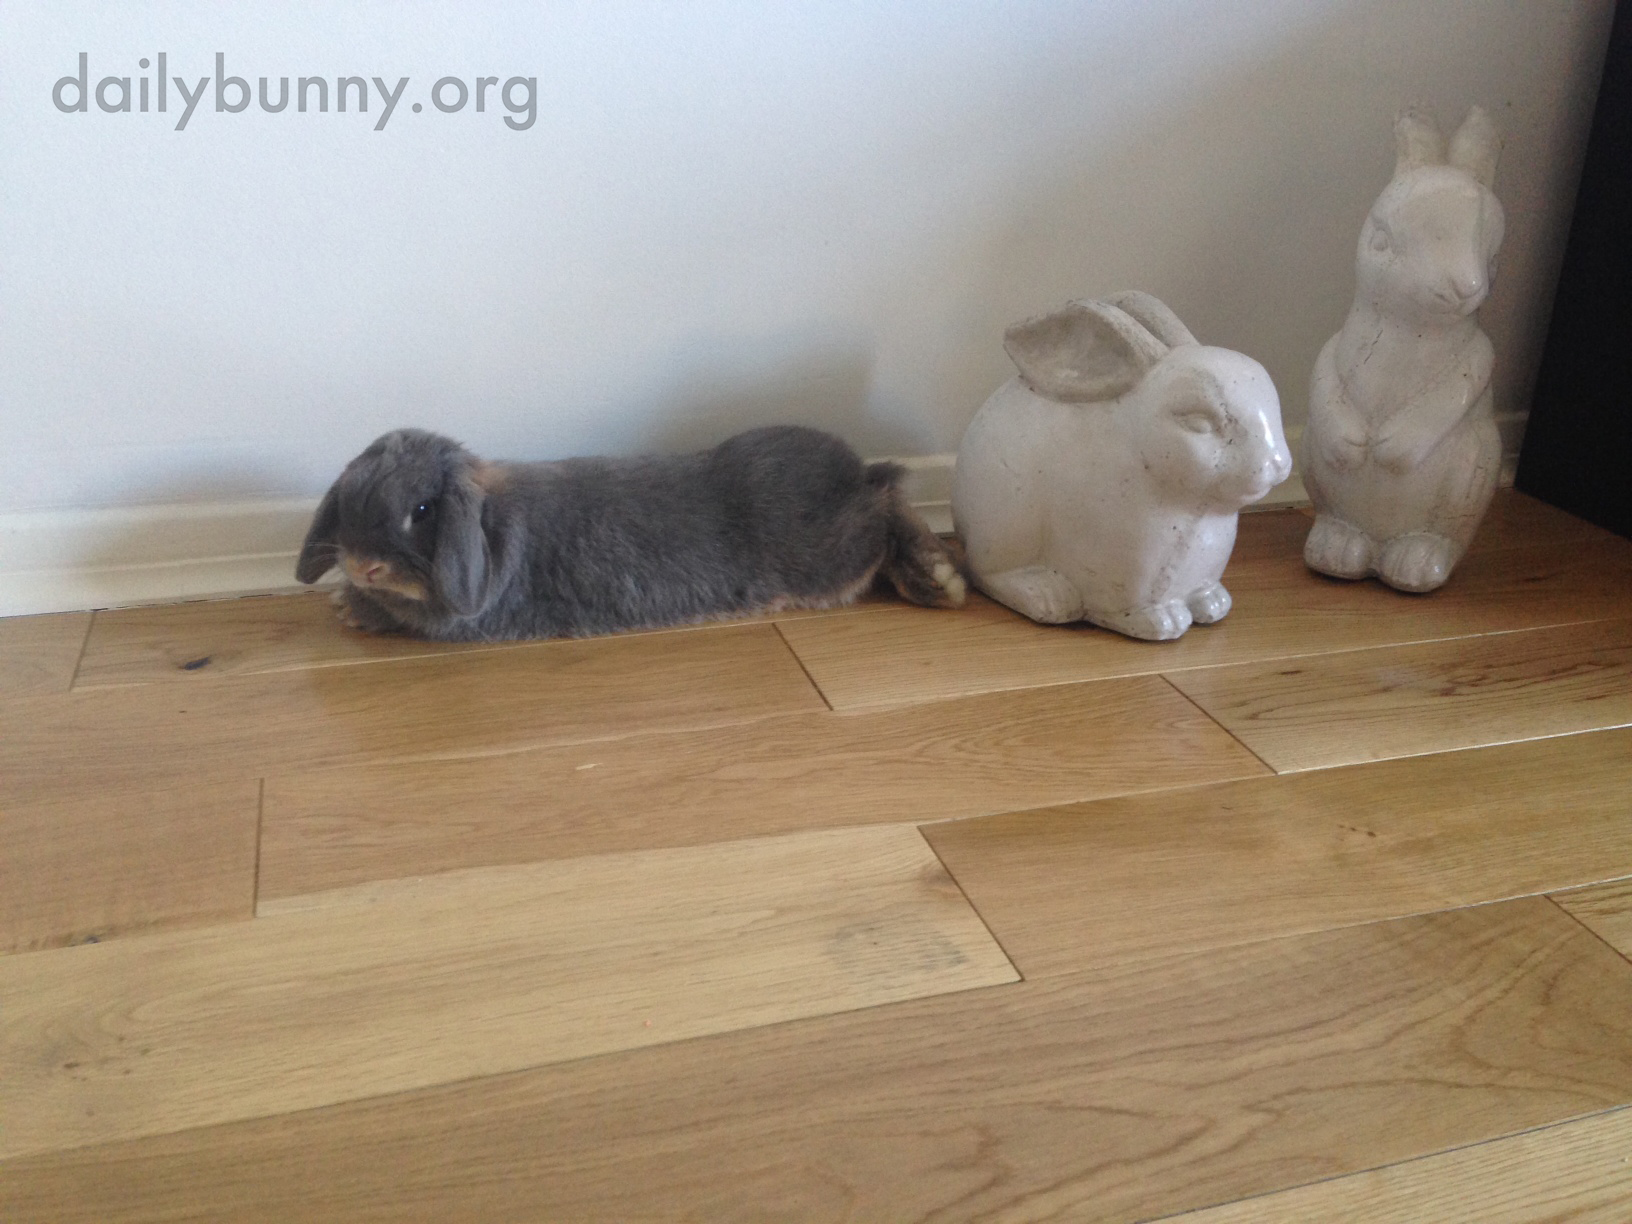 Can't a Grumpy Bunny Just Lie Down without a Human Ooh-ing and Aww-ing and Taking Pictures? 3